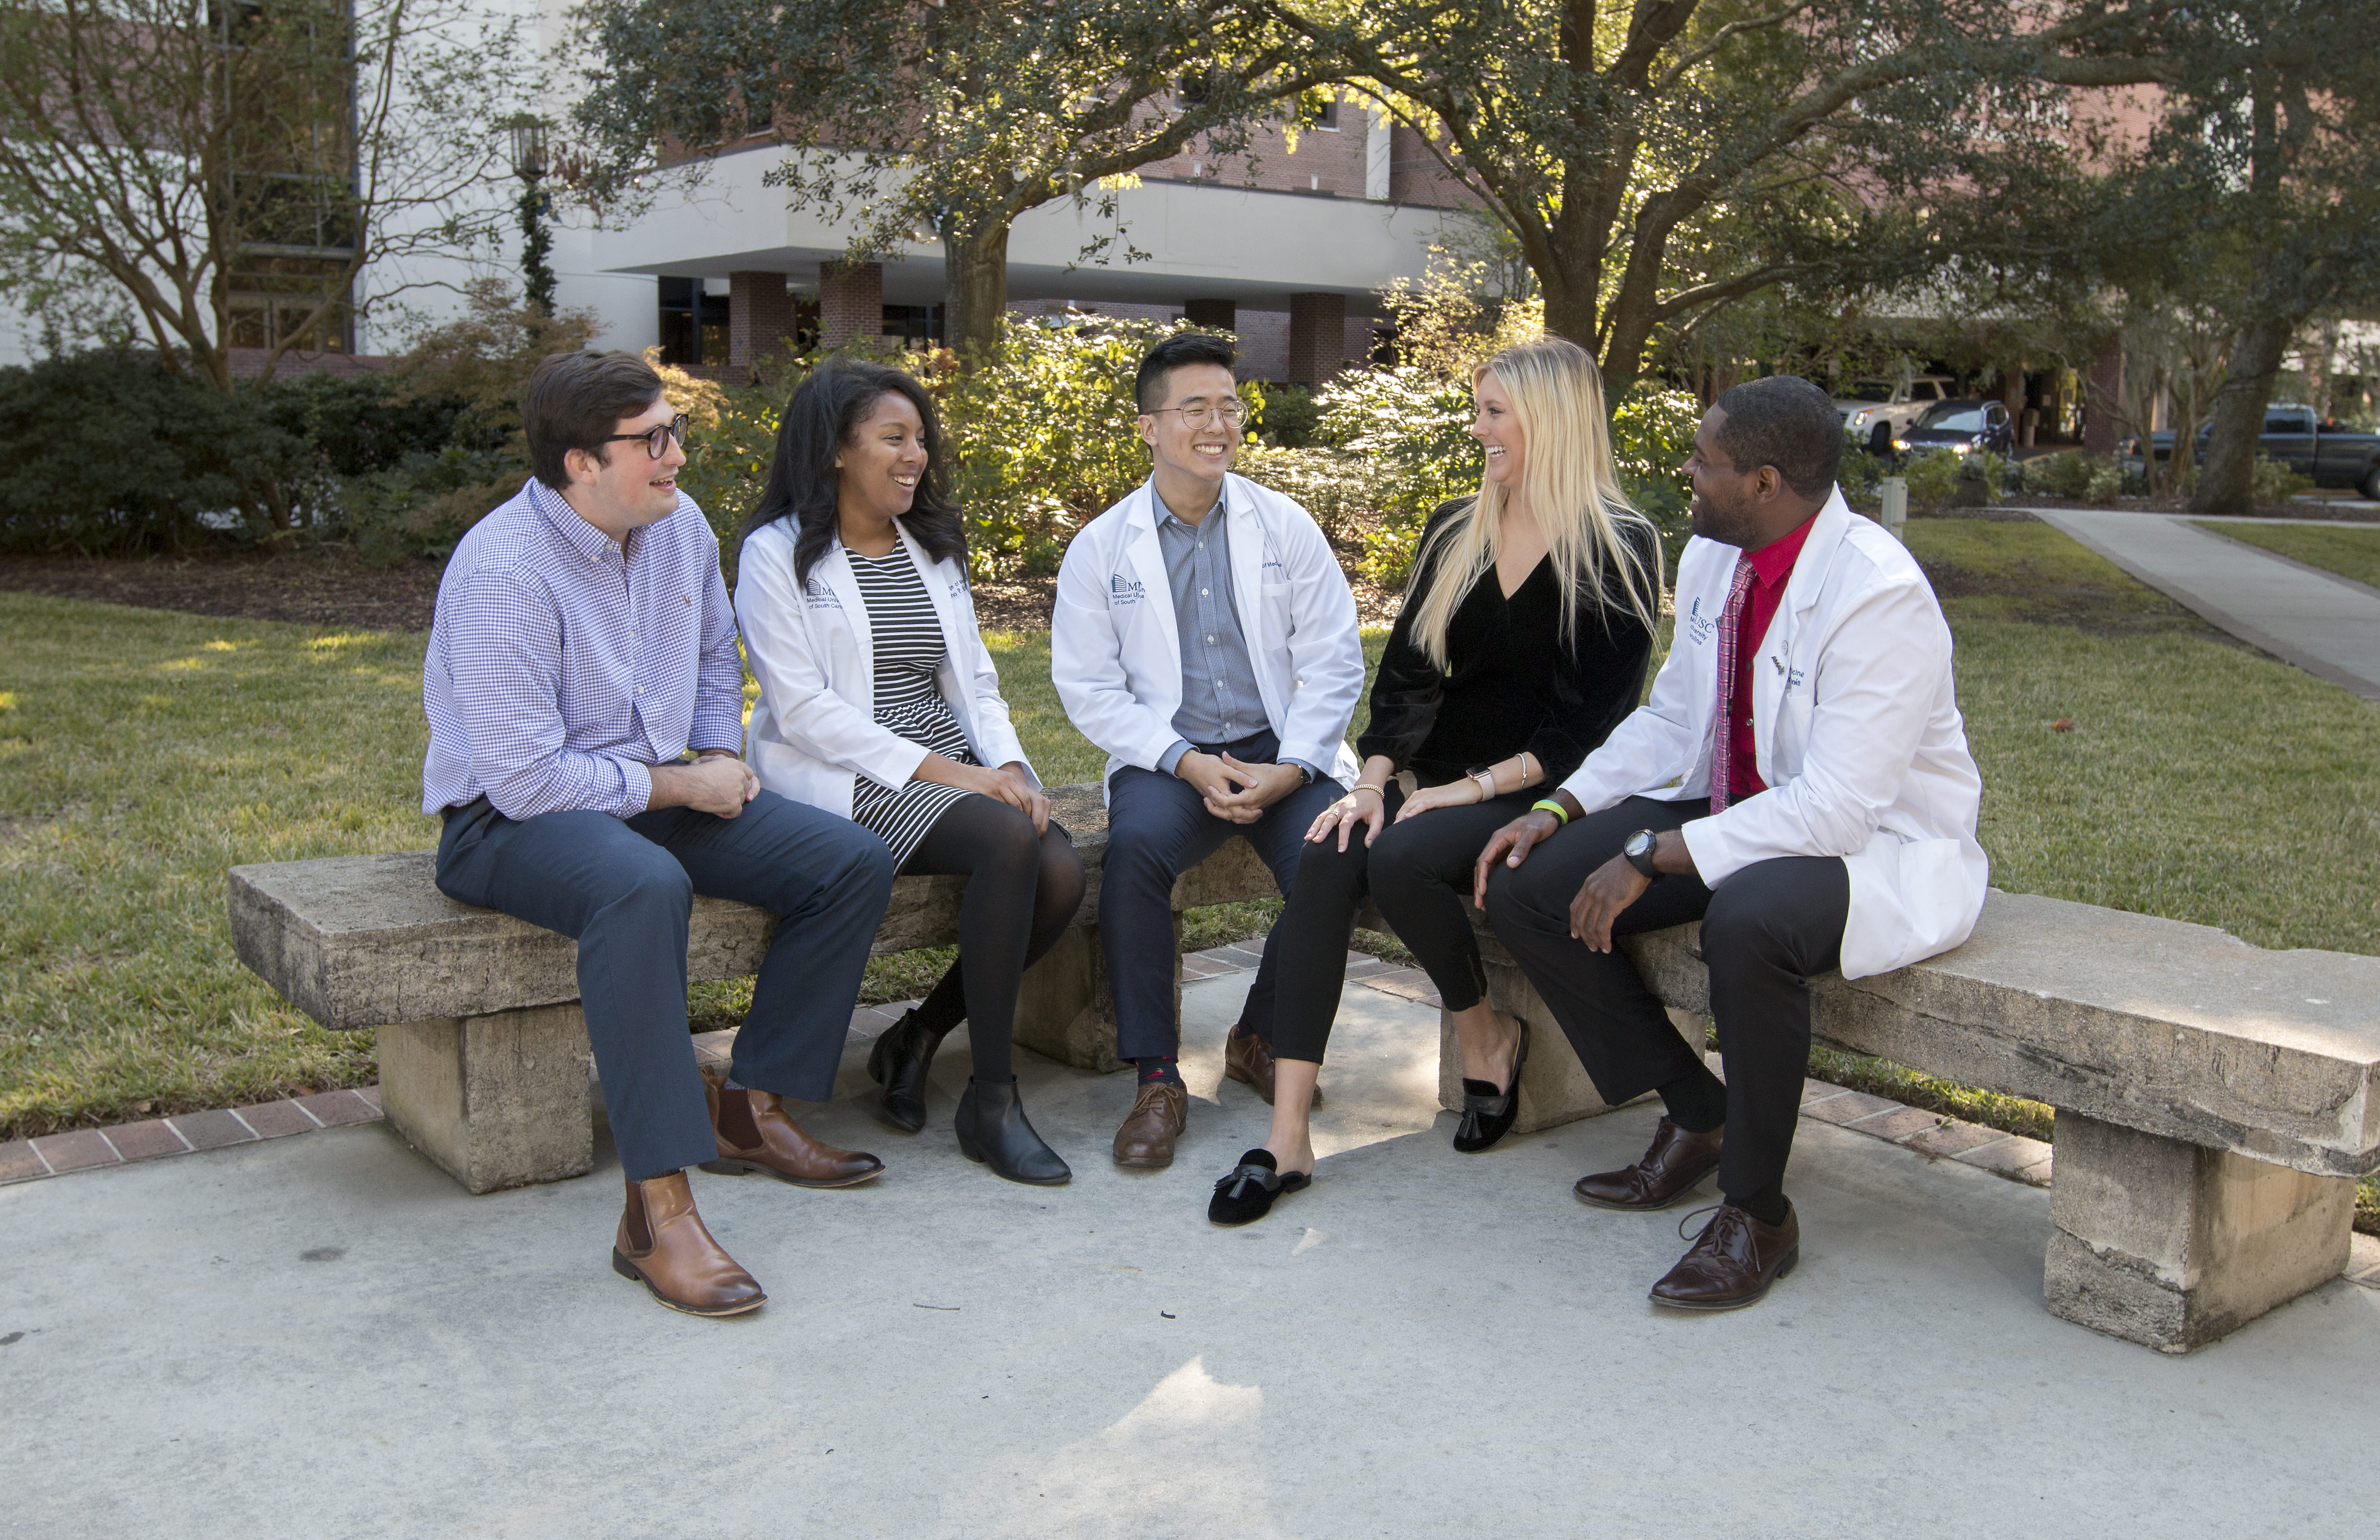 5 medical students wearing white coats sitting on bench on campus